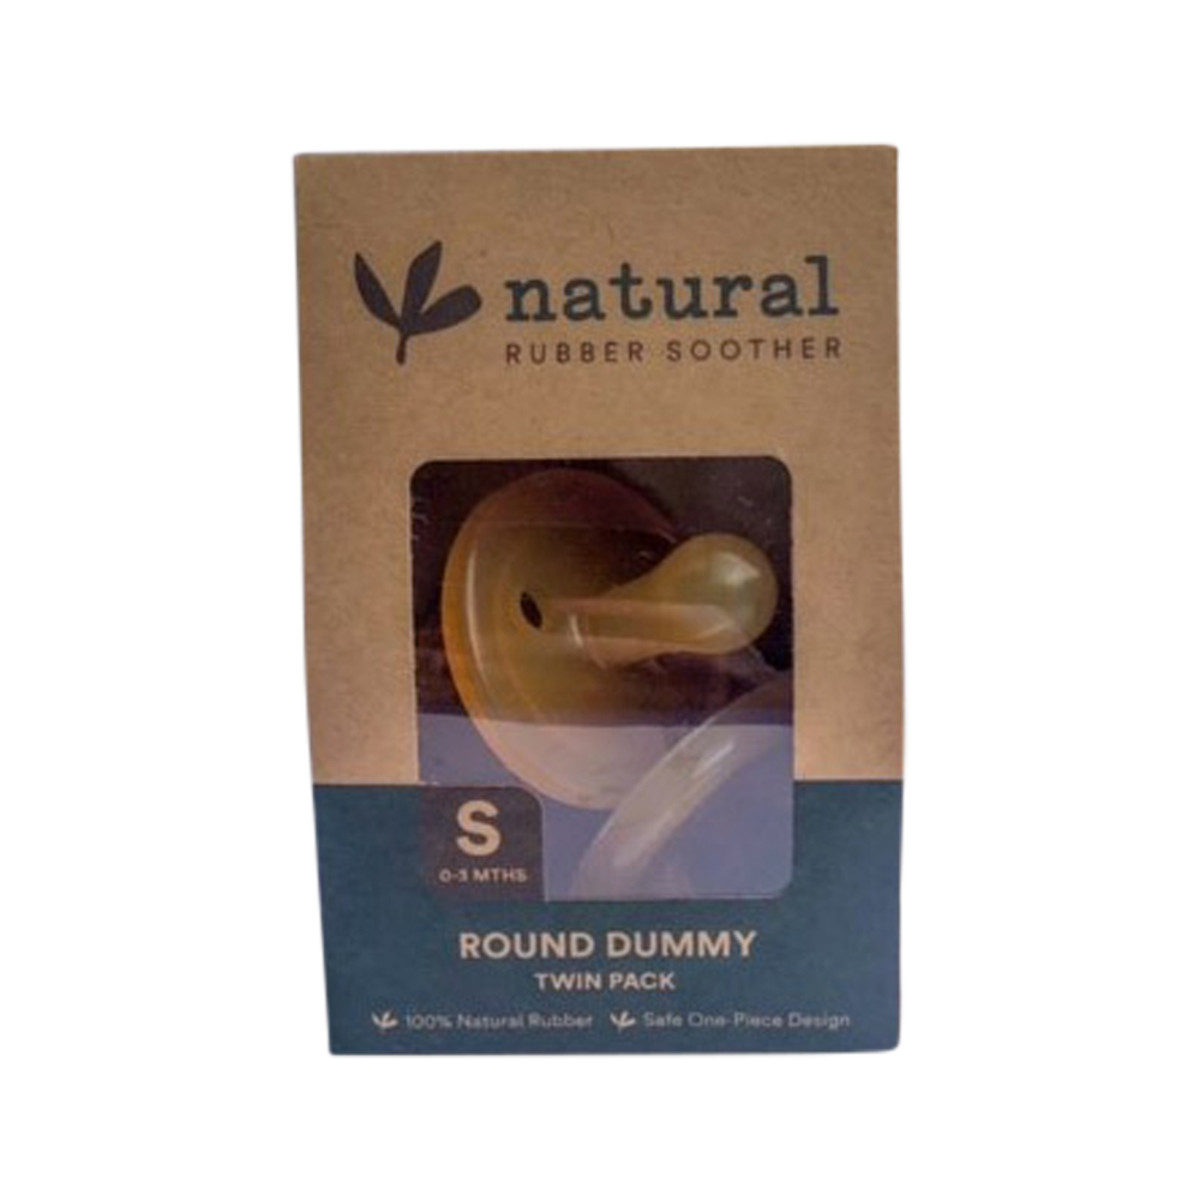 Natural Rubber Soother Round Dummy Small (0-3 Months) Twin Pack